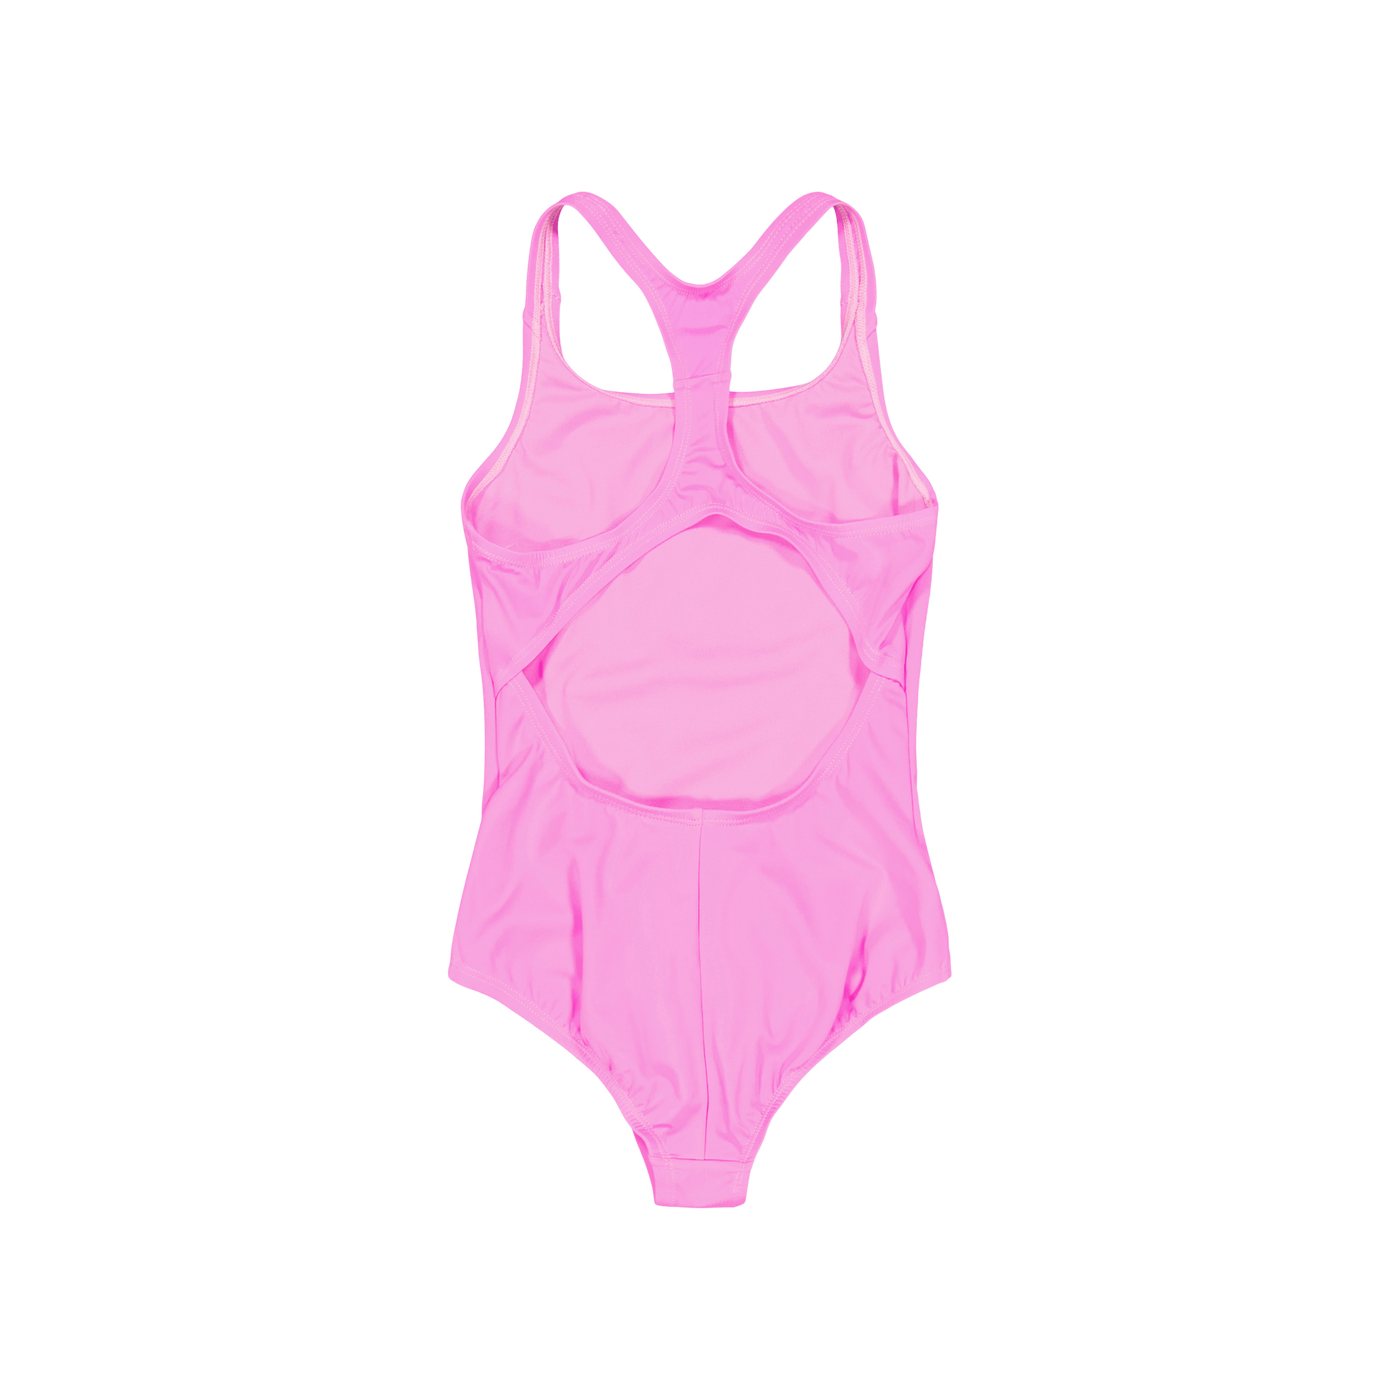 Nike Racerback One Piece Ess Pink Spell